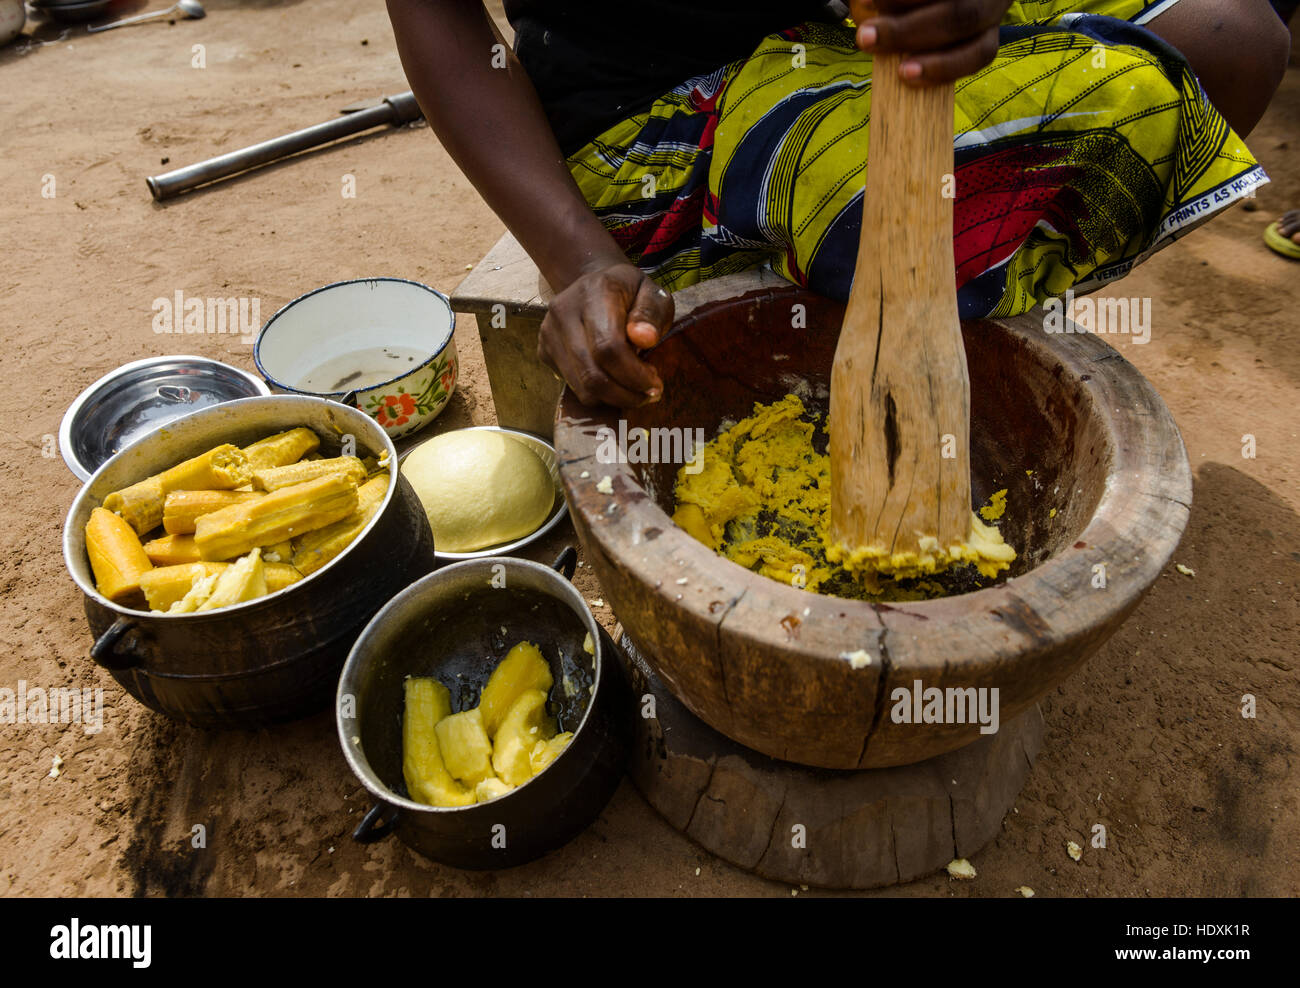 Village life in rural Ivory Coast Stock Photo